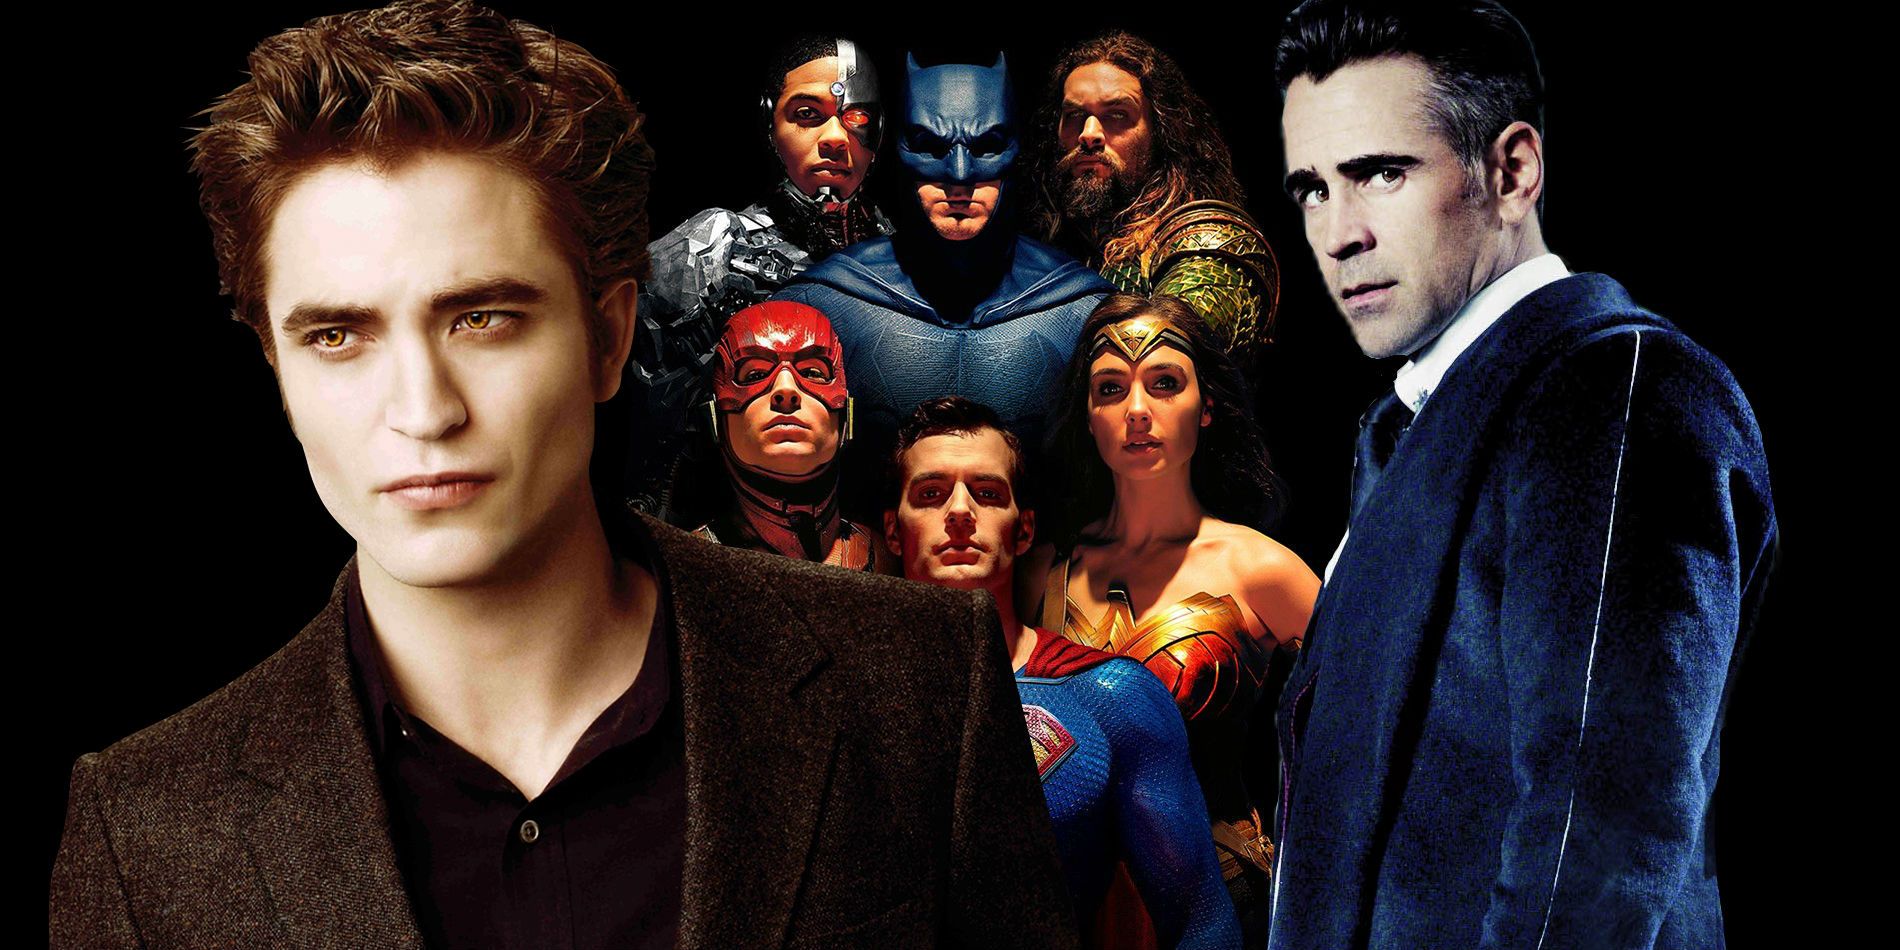 The Batman Casting Is The Best Way For DC To Get Past Justice League